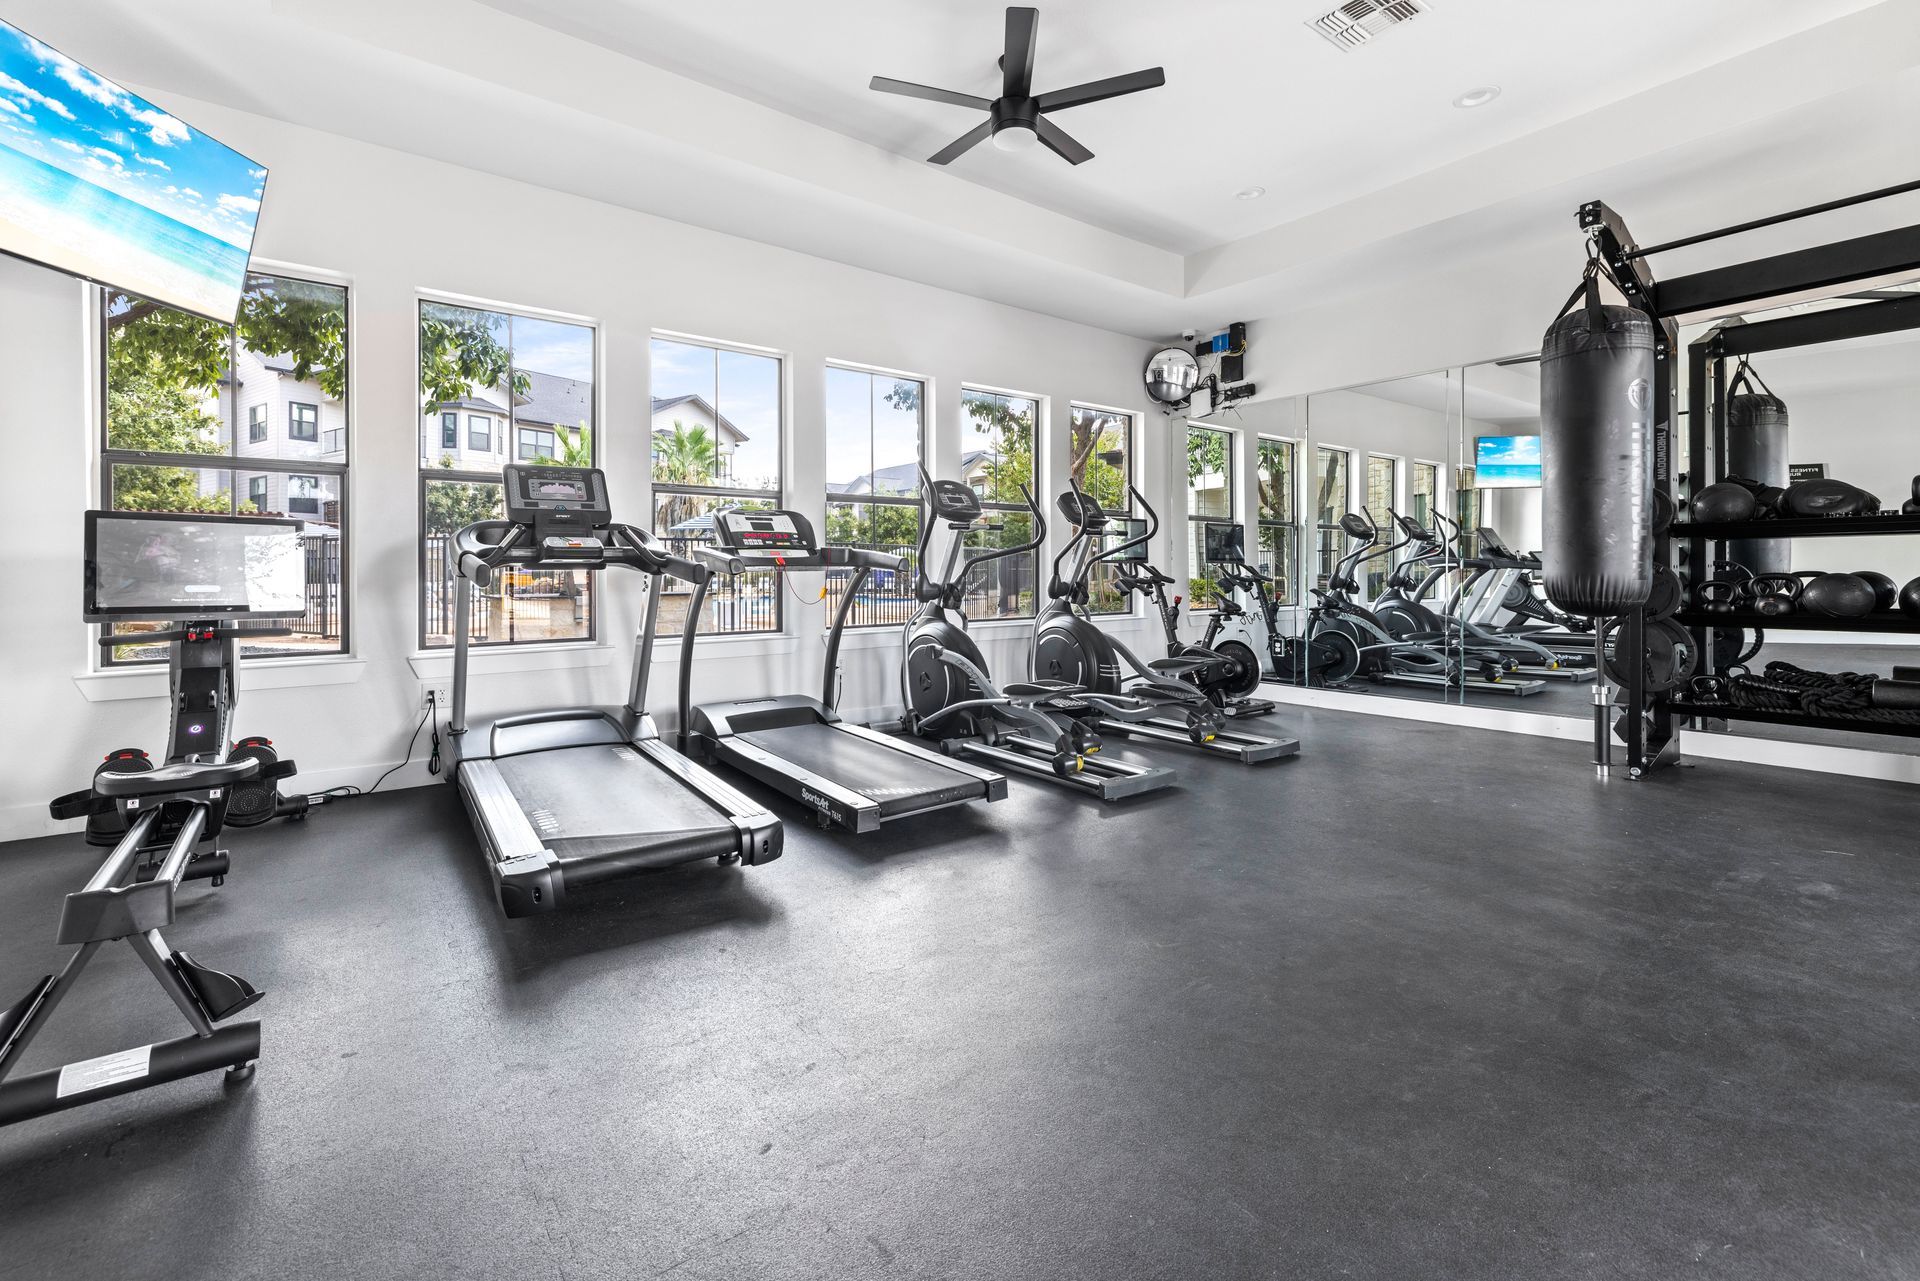 Fitness center at Westwood Terrace.